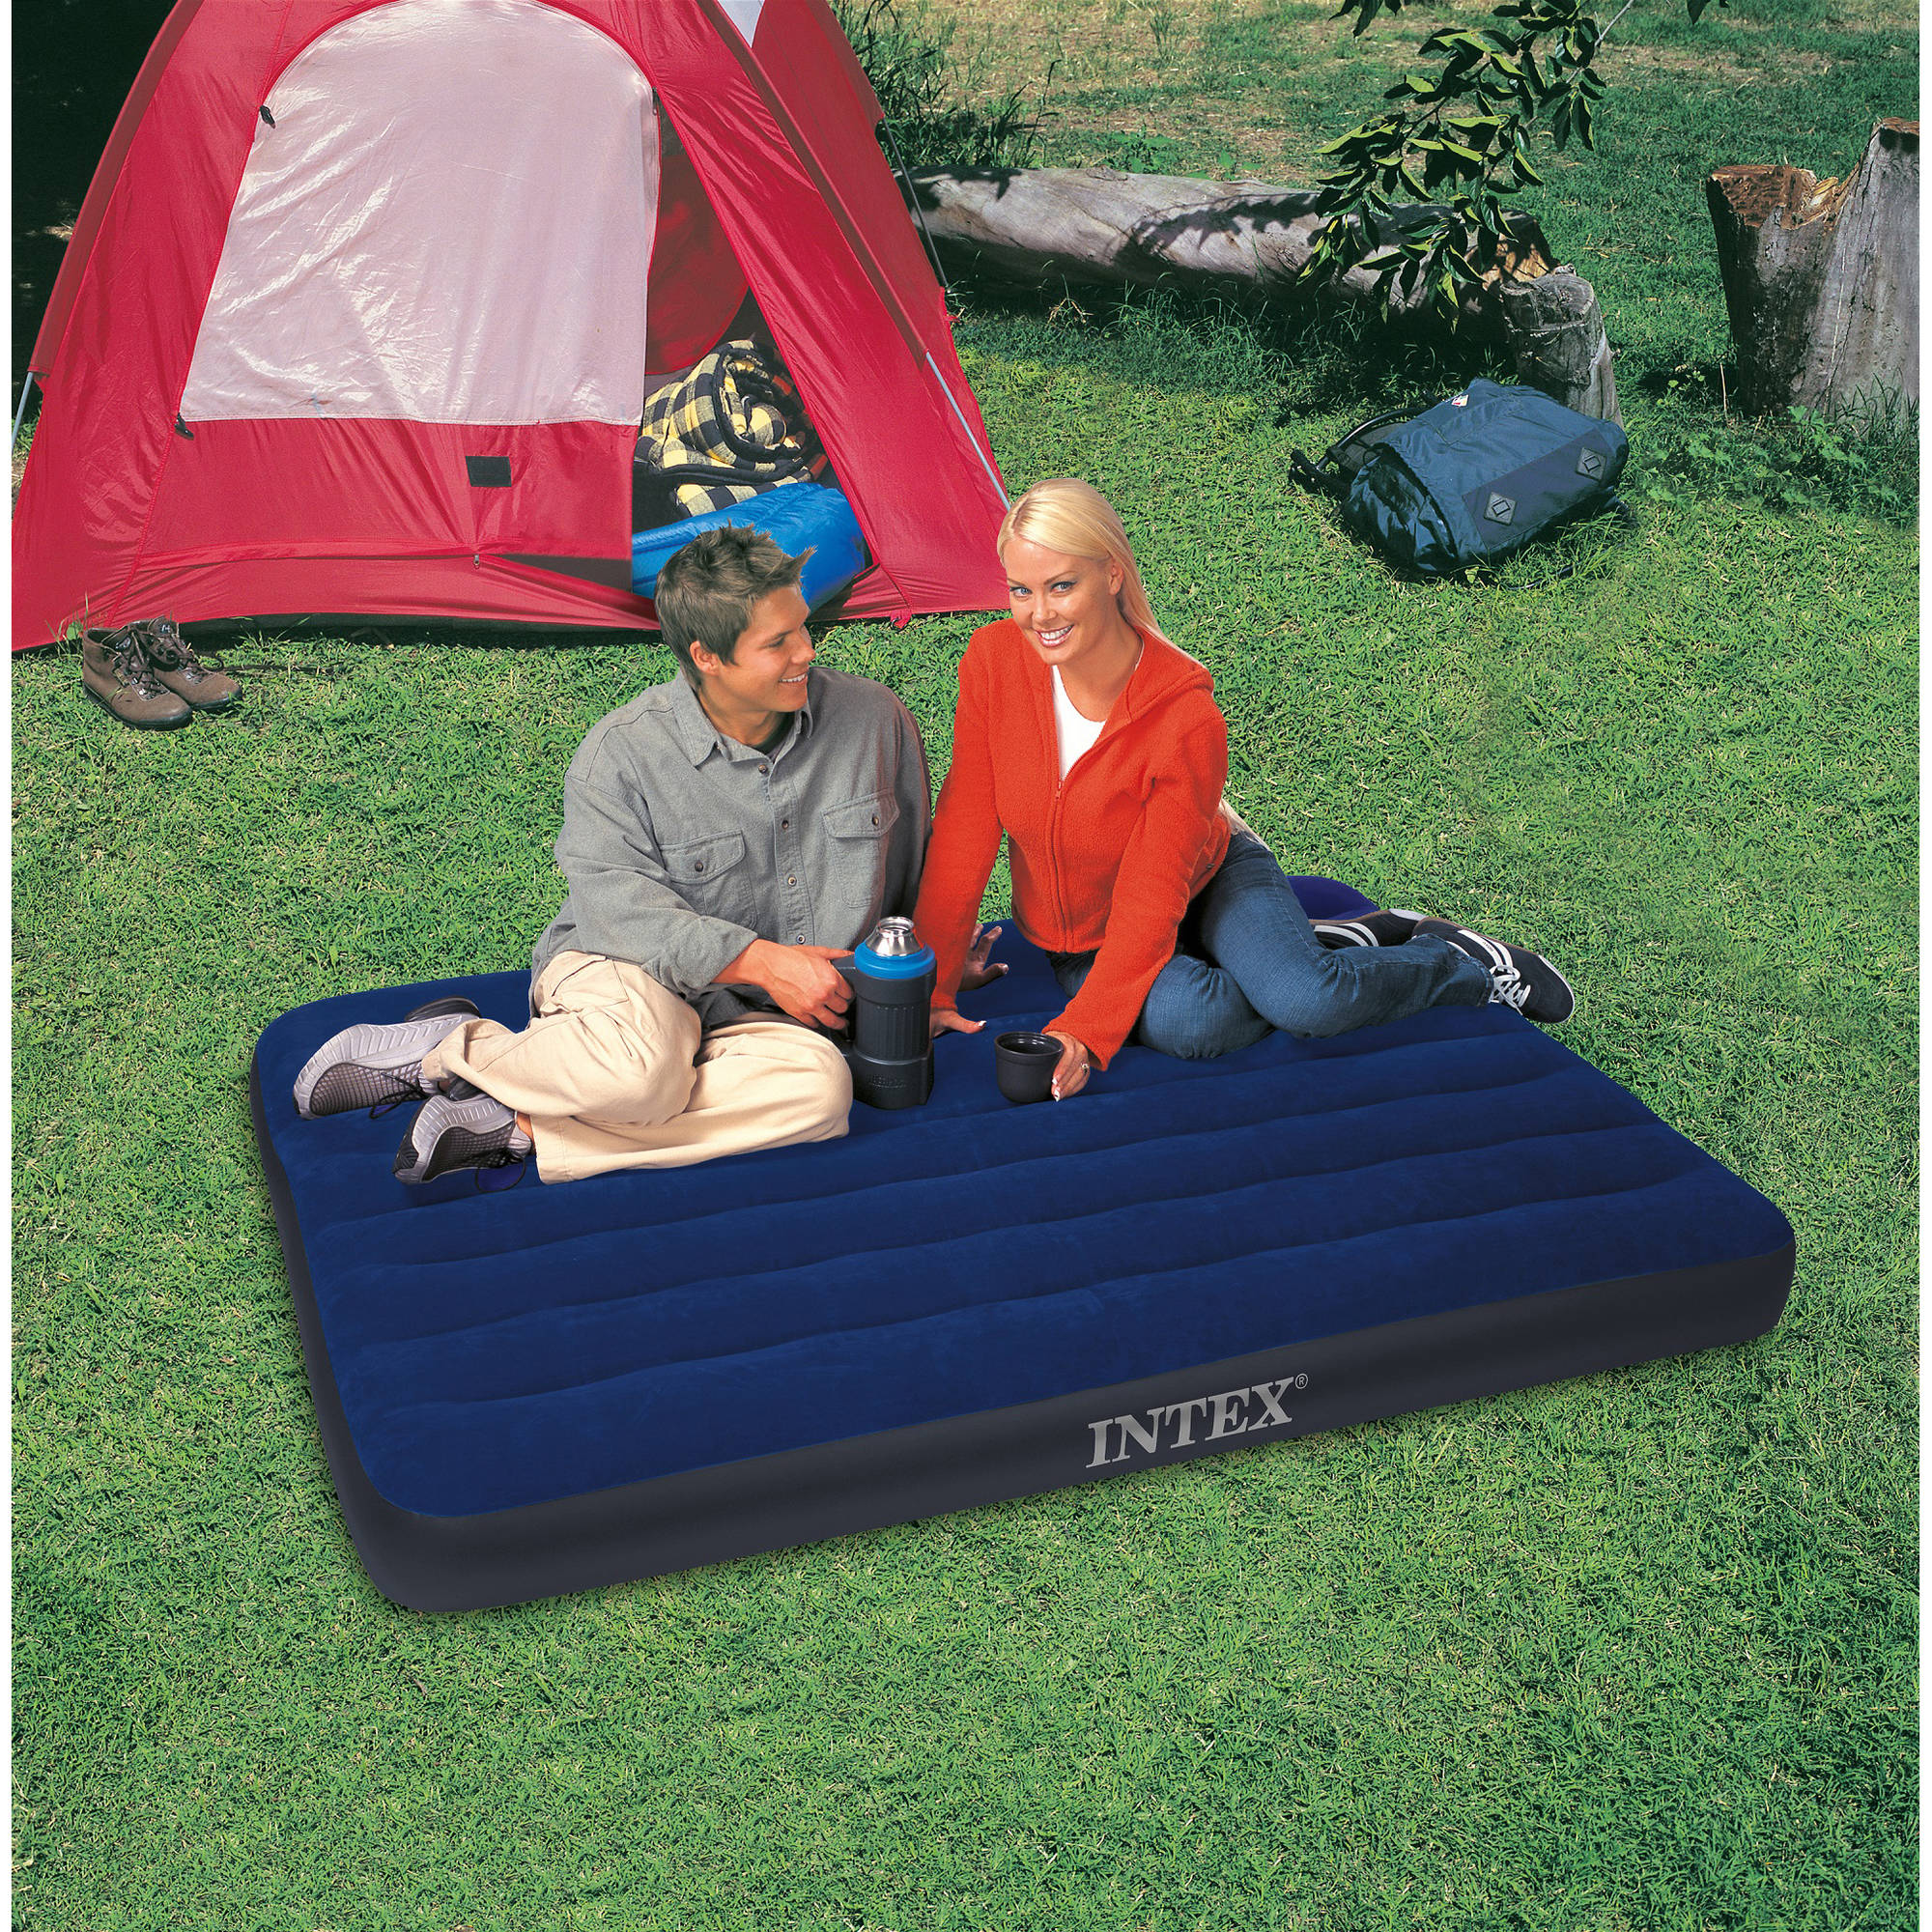 Intex Full 8.75" Classic Downy Inflatable Airbed Mattress - image 5 of 6